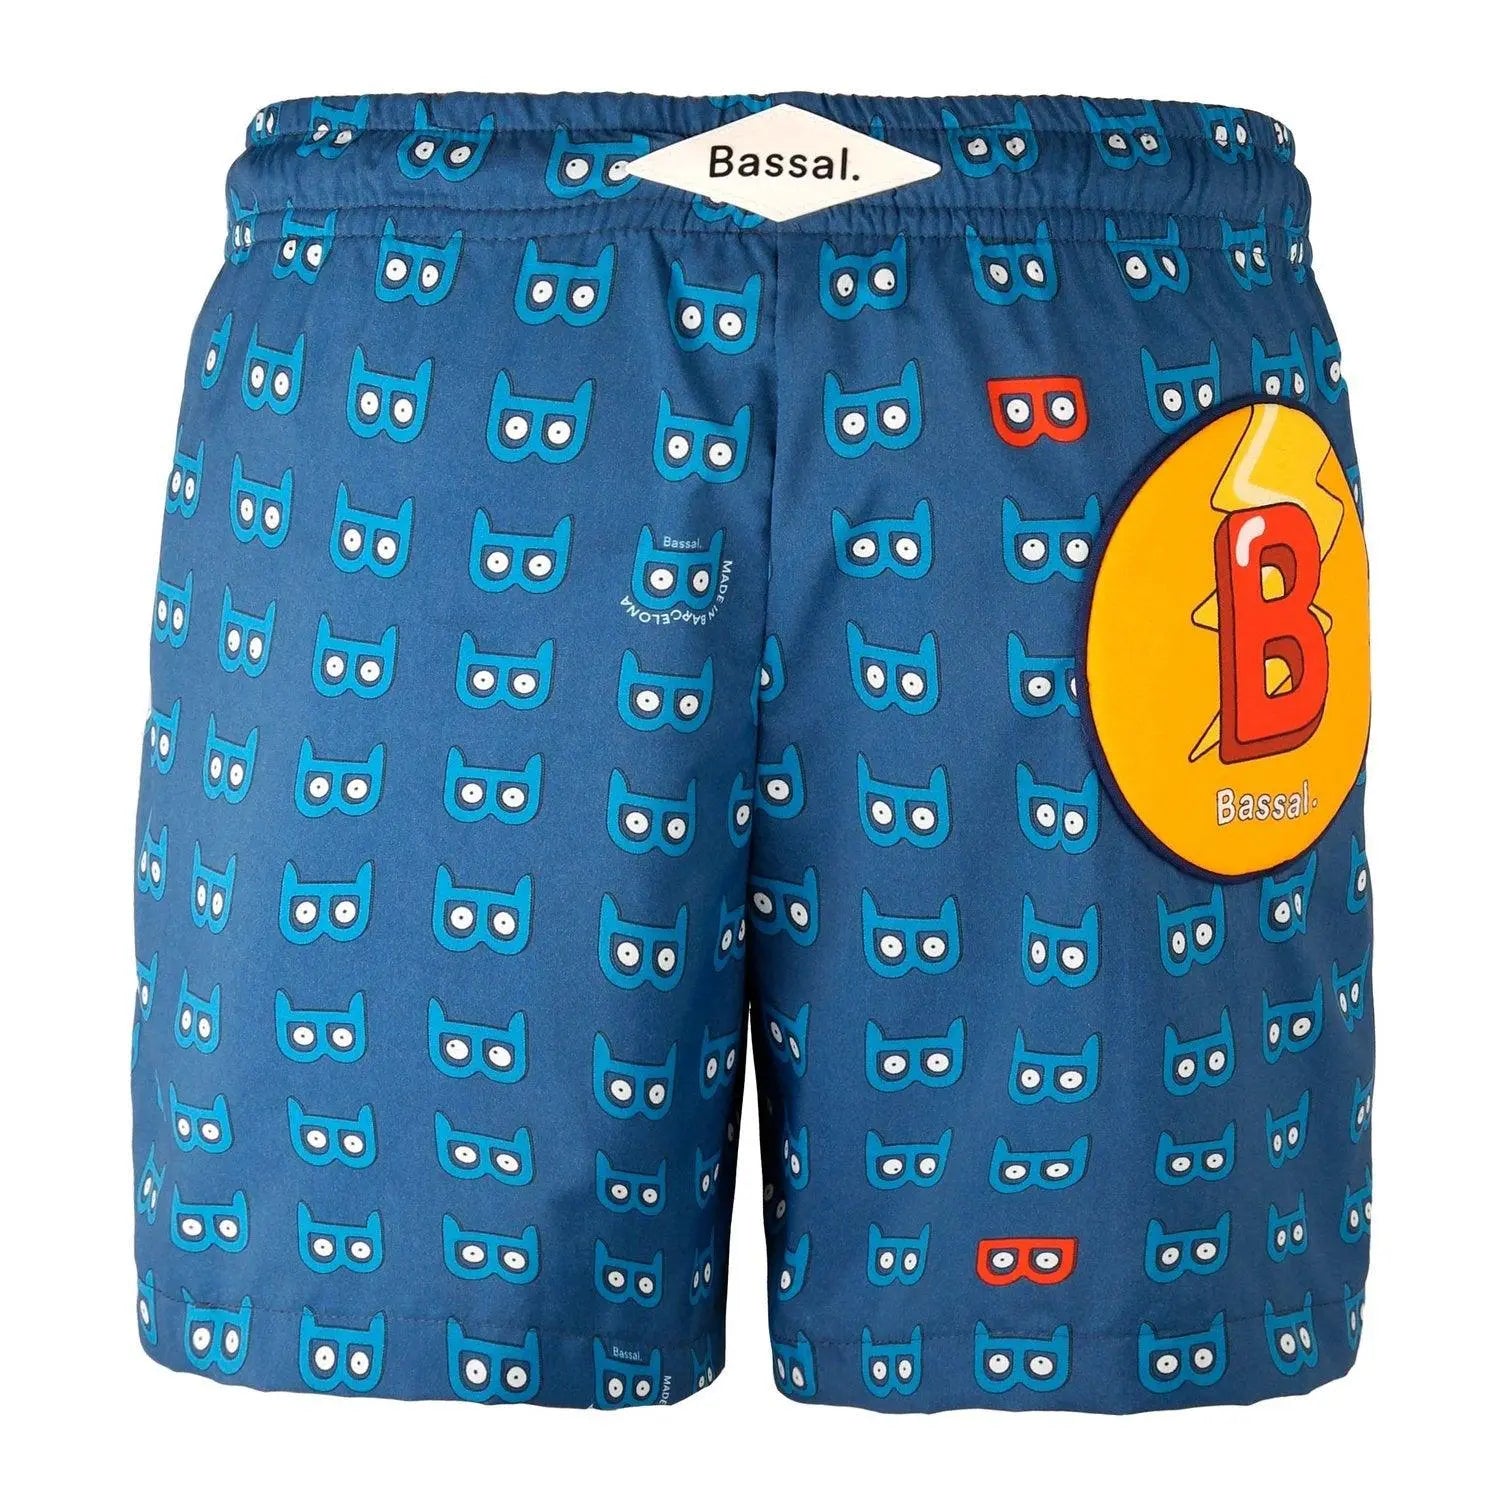 A pair of blue Mask Kids Swimwear with a cute owl pattern, neatly folded in an orange-bordered white box. A tag with the brand name "Bassal" and a plastic zipper bag are visible. The brand's name "Bassalstore" is printed on the box, showcasing its Barcelona roots.